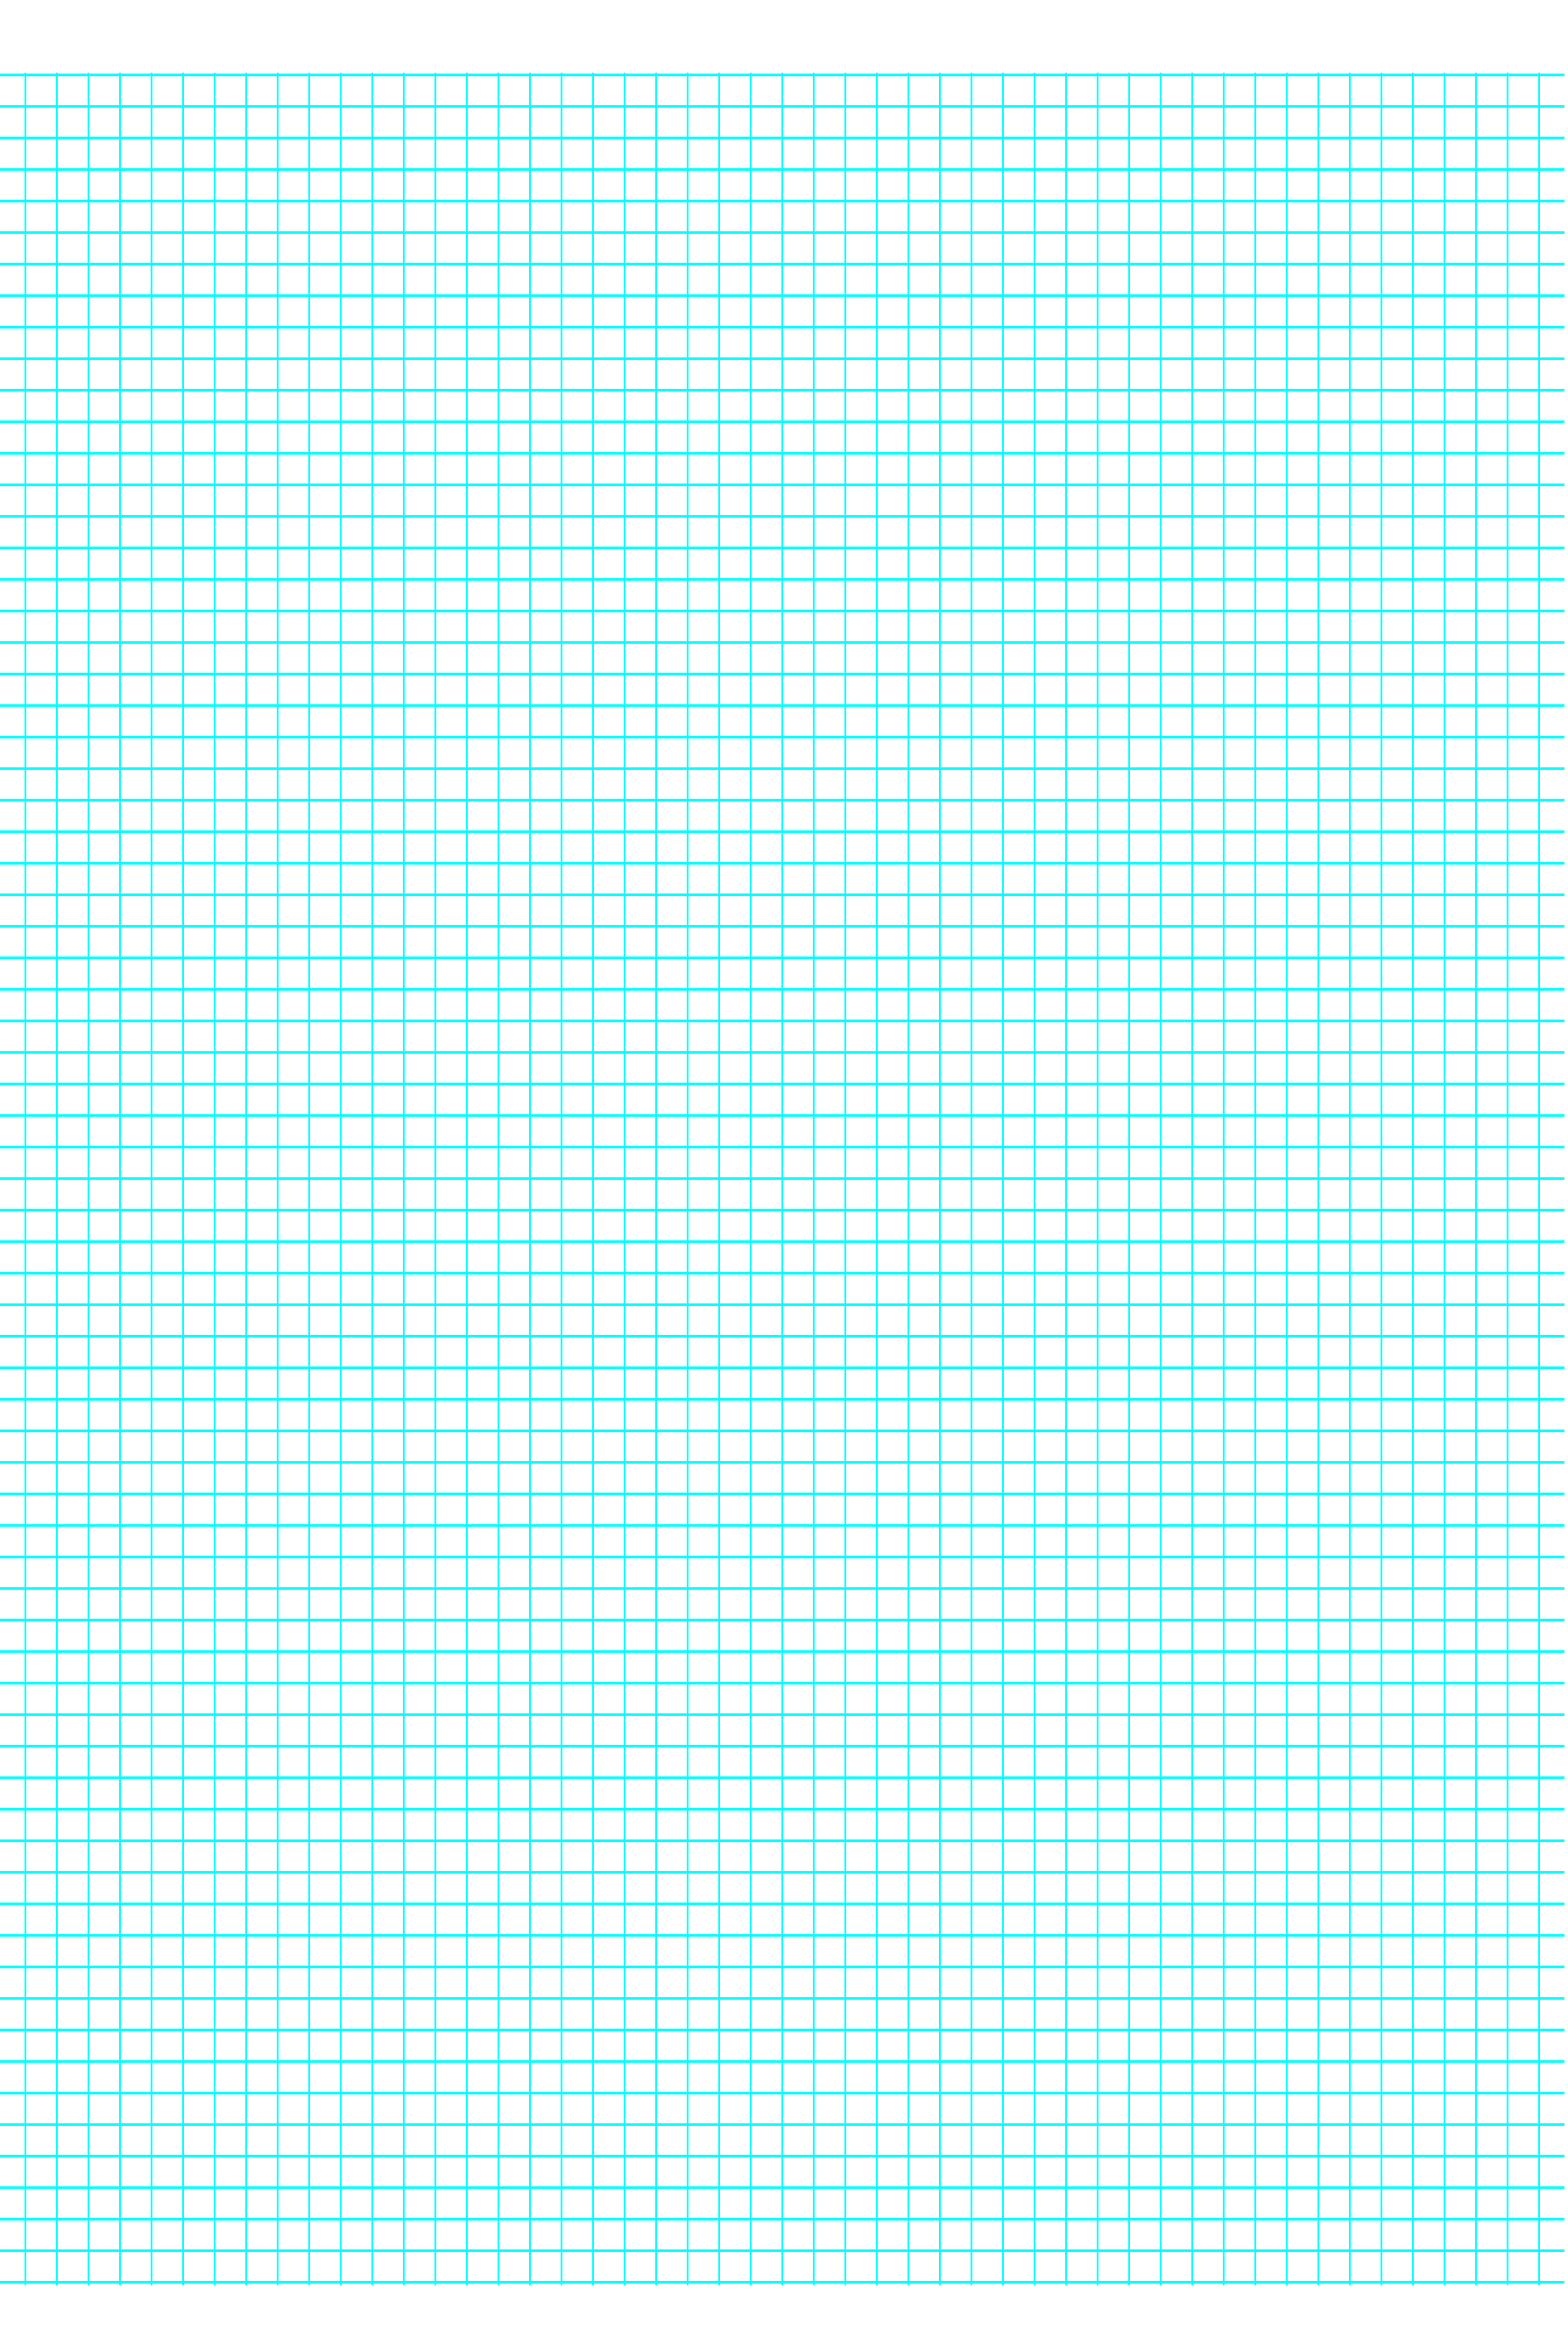 Printable Graph Paper 6 Per Page 20by20 In 2021 Pixelkunst